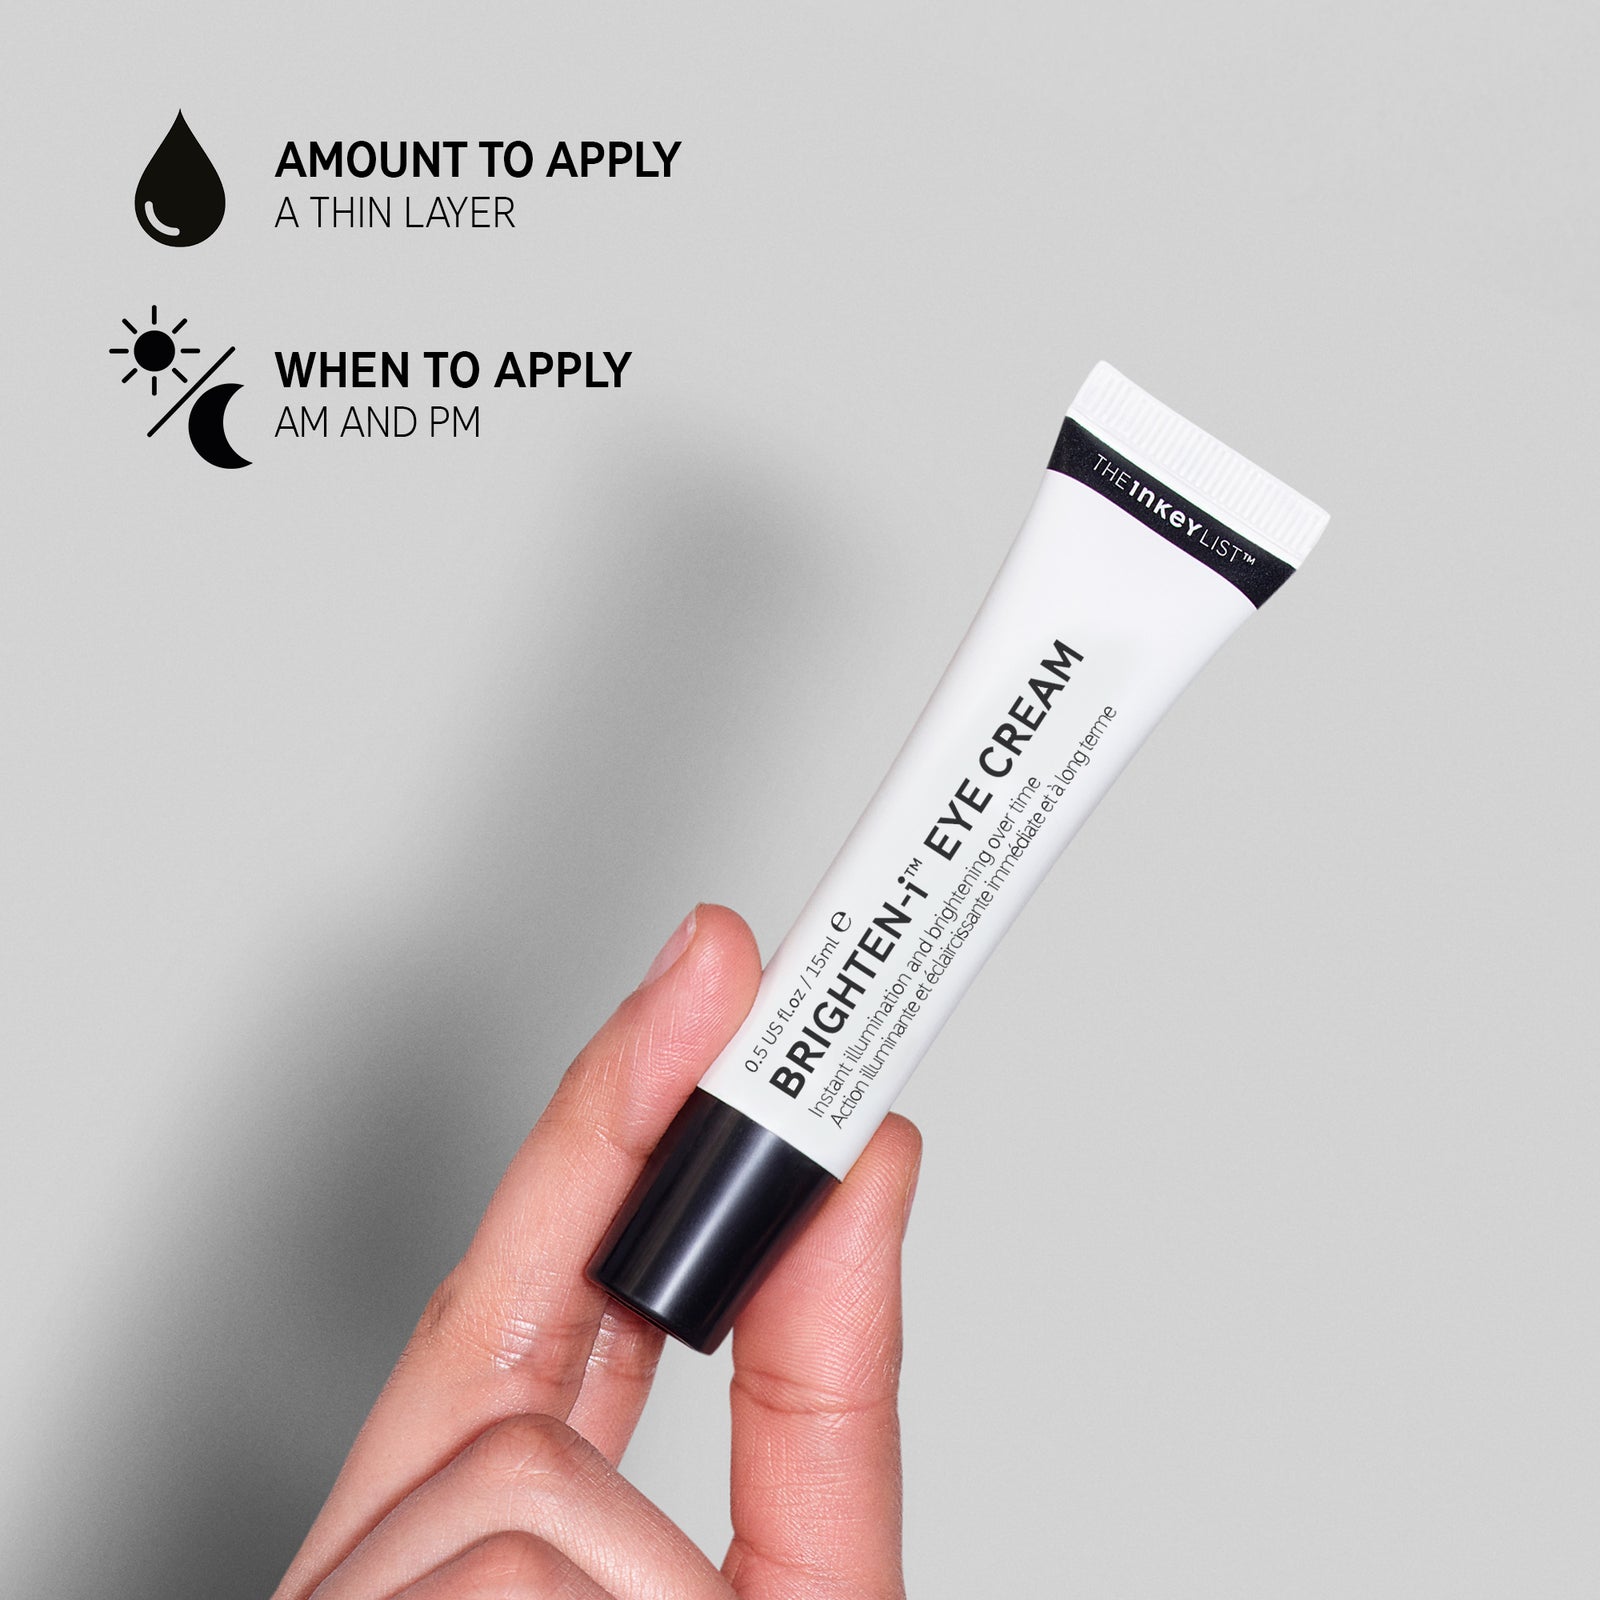 Hand holding Brighten-I Eye Cream tube with text explaining how and when to use